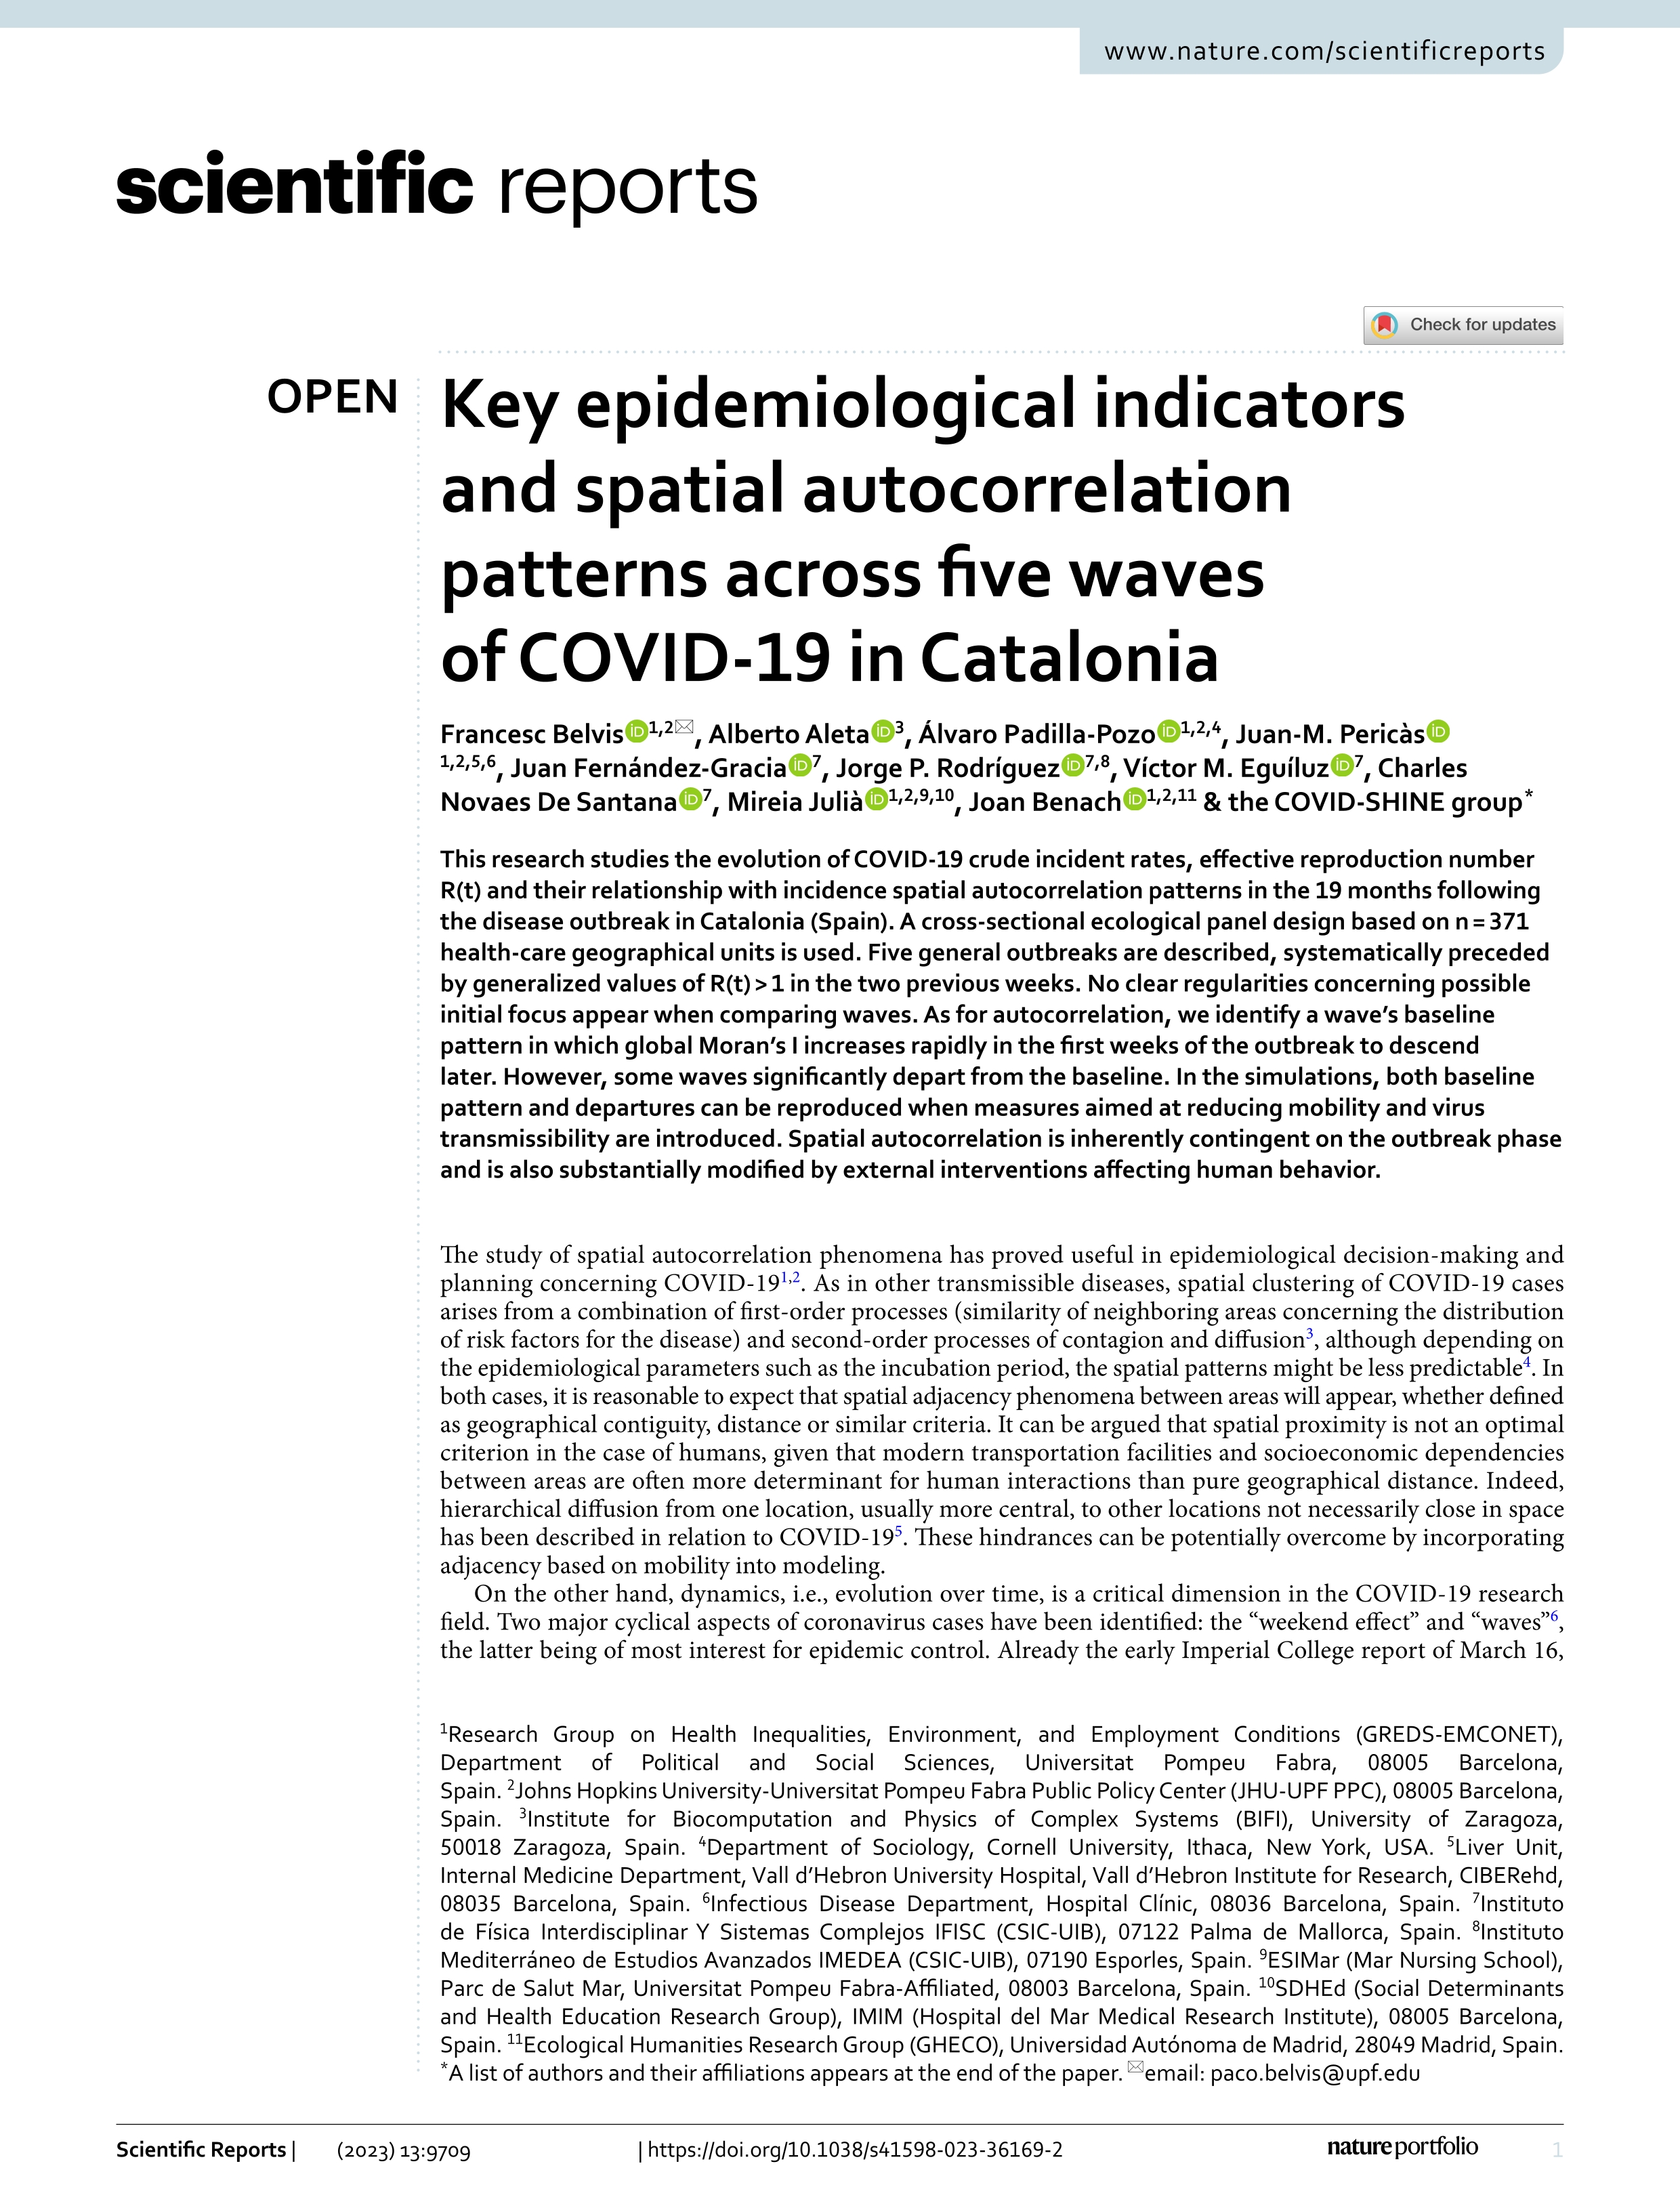 Key epidemiological indicators and spatial autocorrelation patterns across five waves of COVID-19 in Catalonia